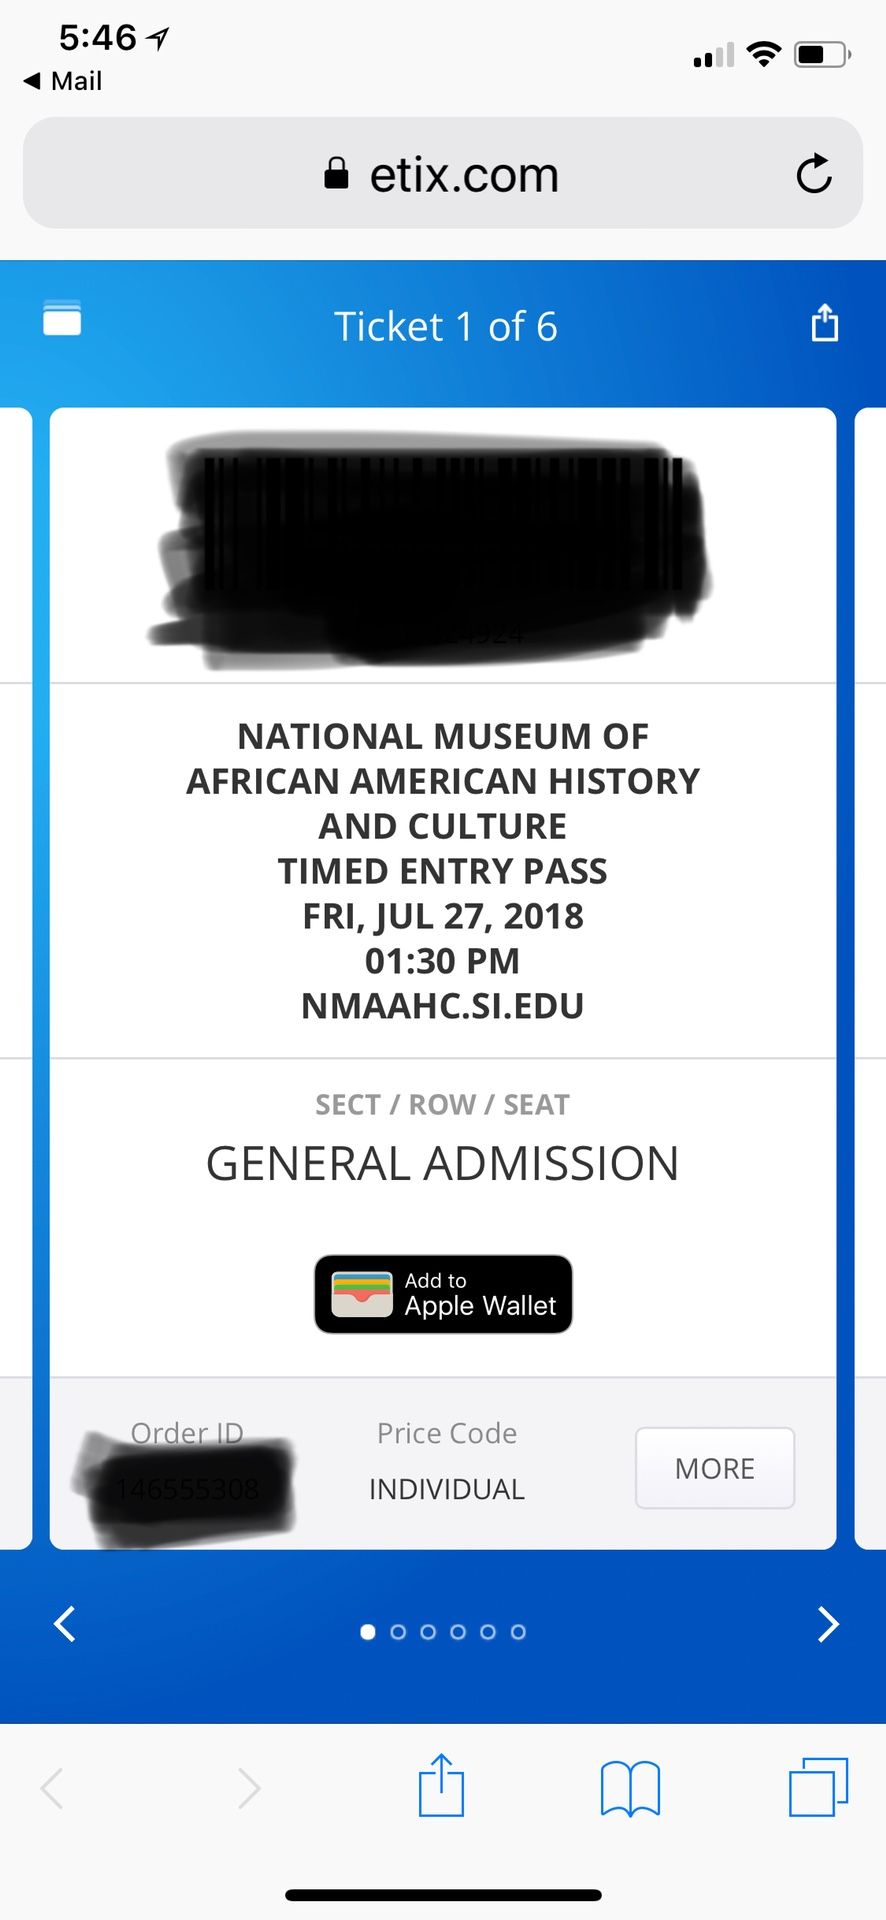 6 TICKETS TO MUSEUM OF AFRICAN AMERICAN HISTORY & CULTURE